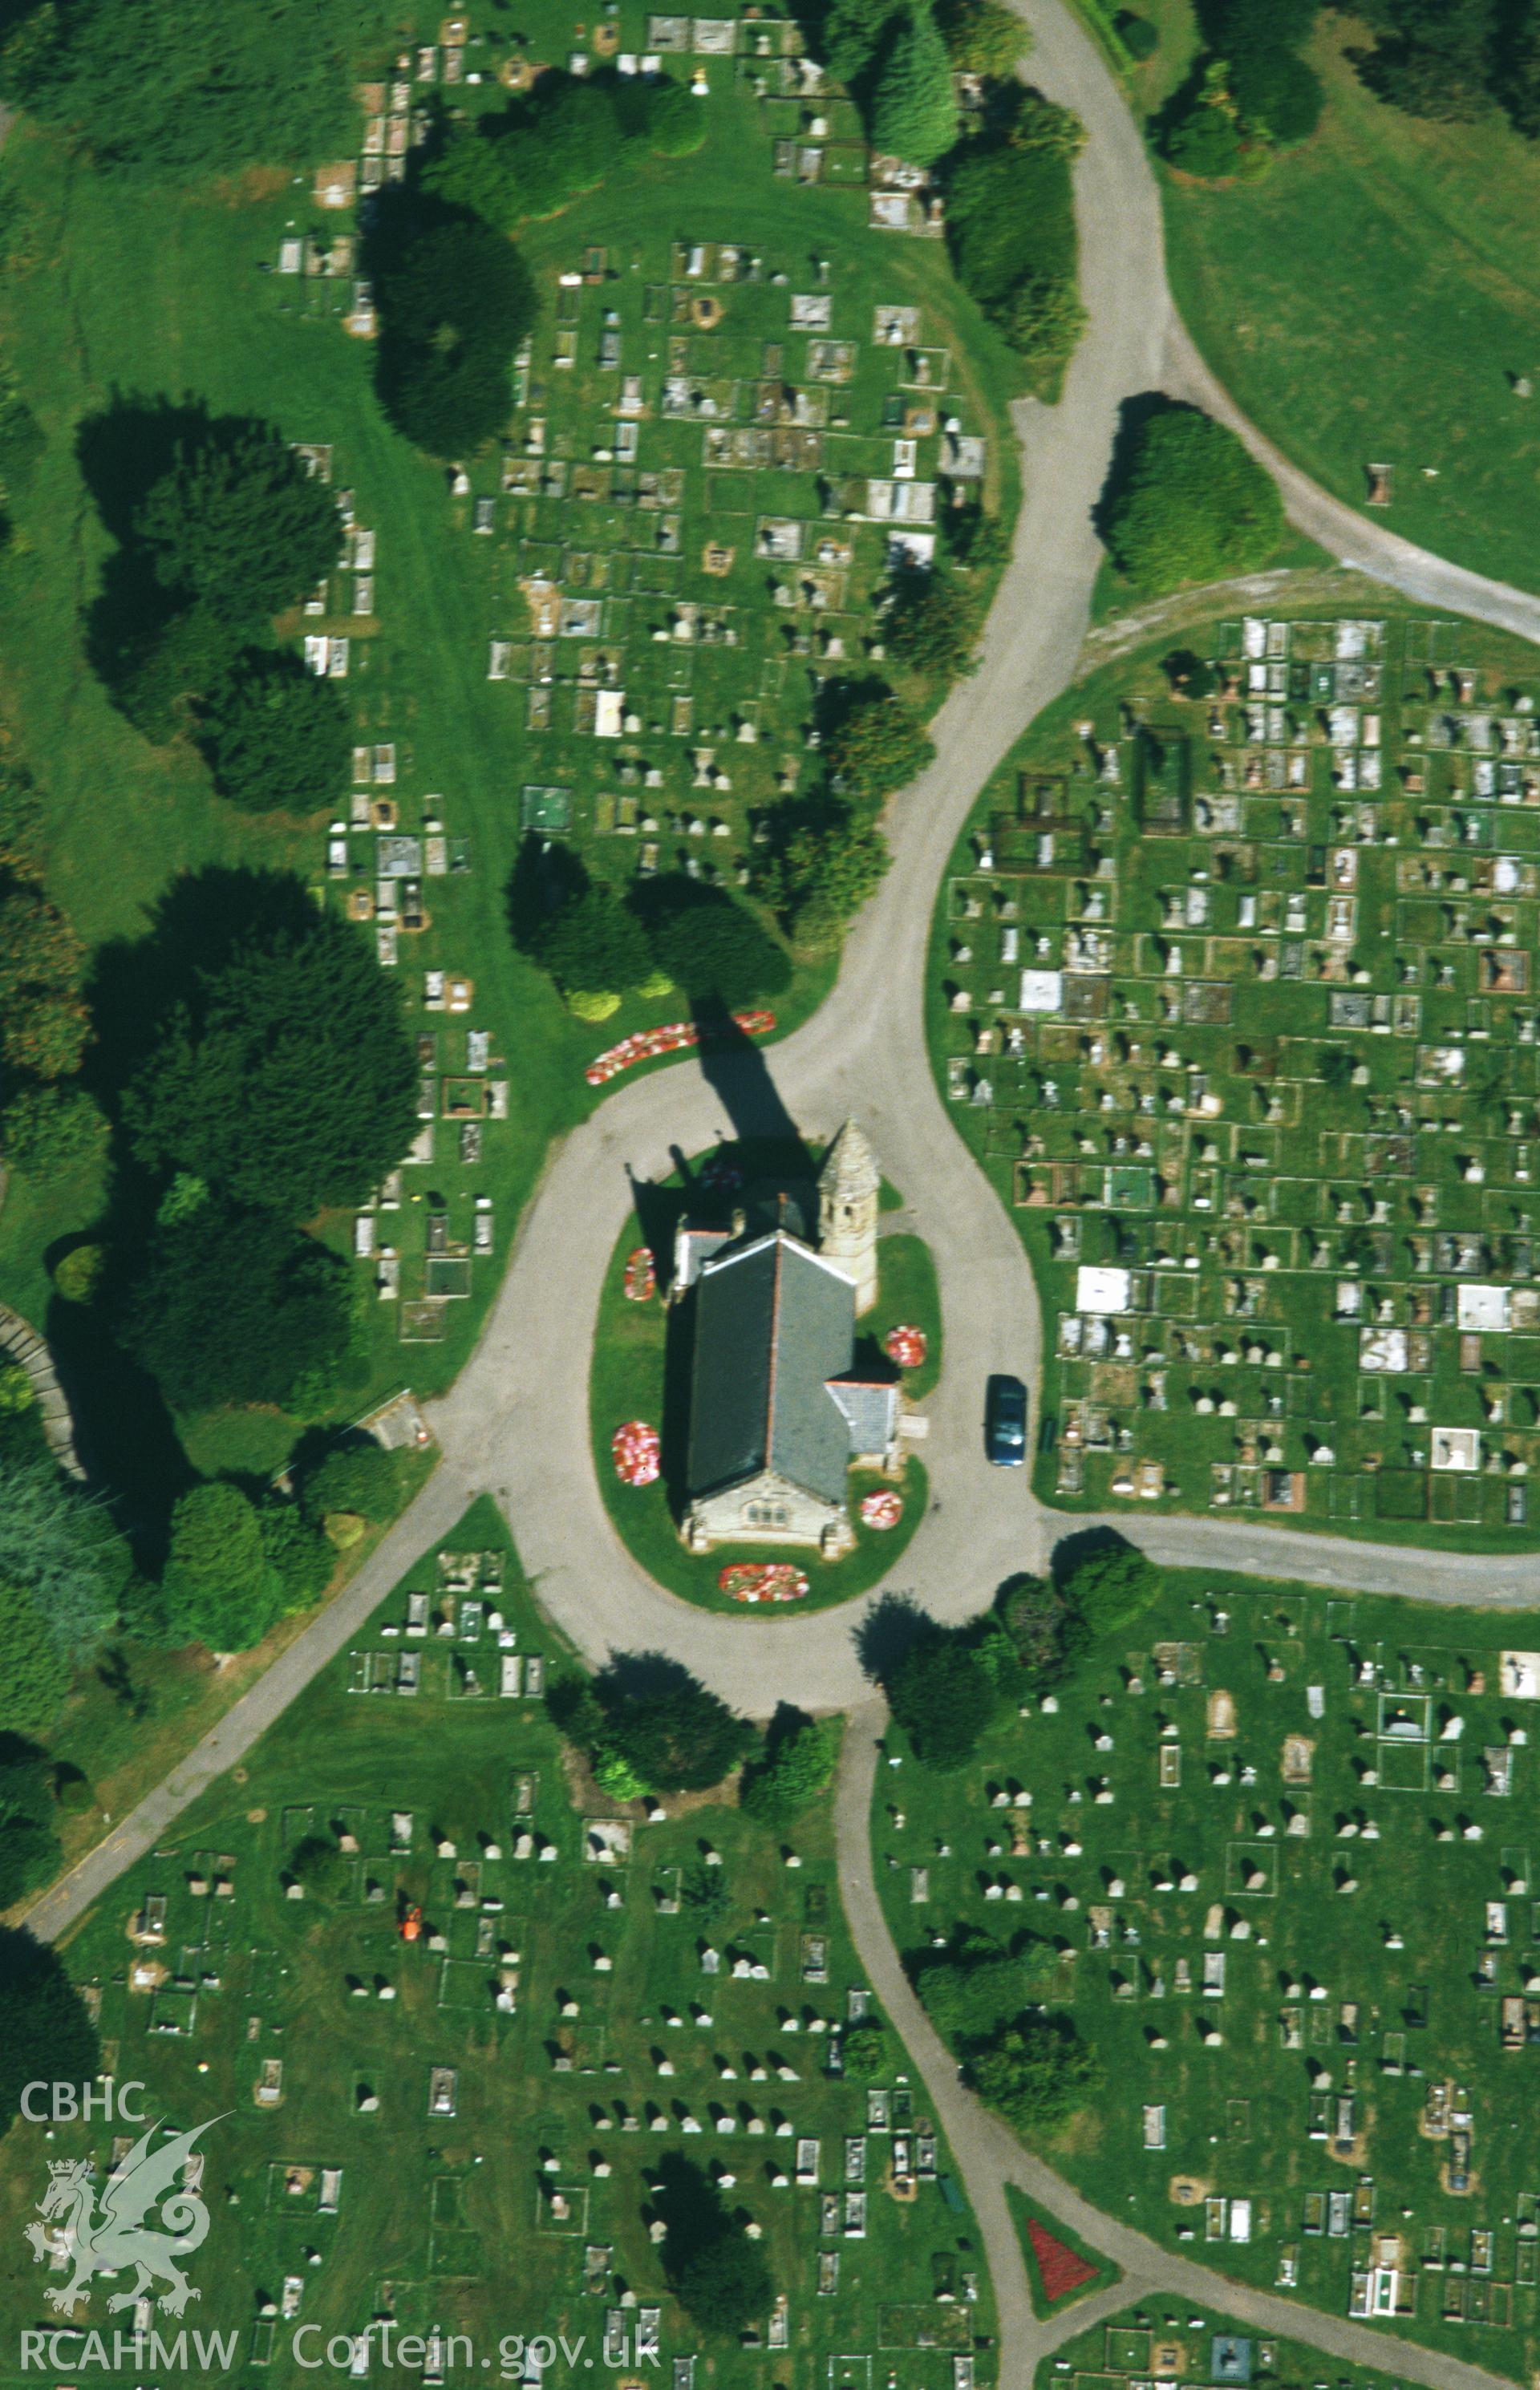 Slide of RCAHMW colour oblique aerial photograph of Mortuary Chapel, New Cemetery, Abergavenny, taken by Toby Driver, 2003.